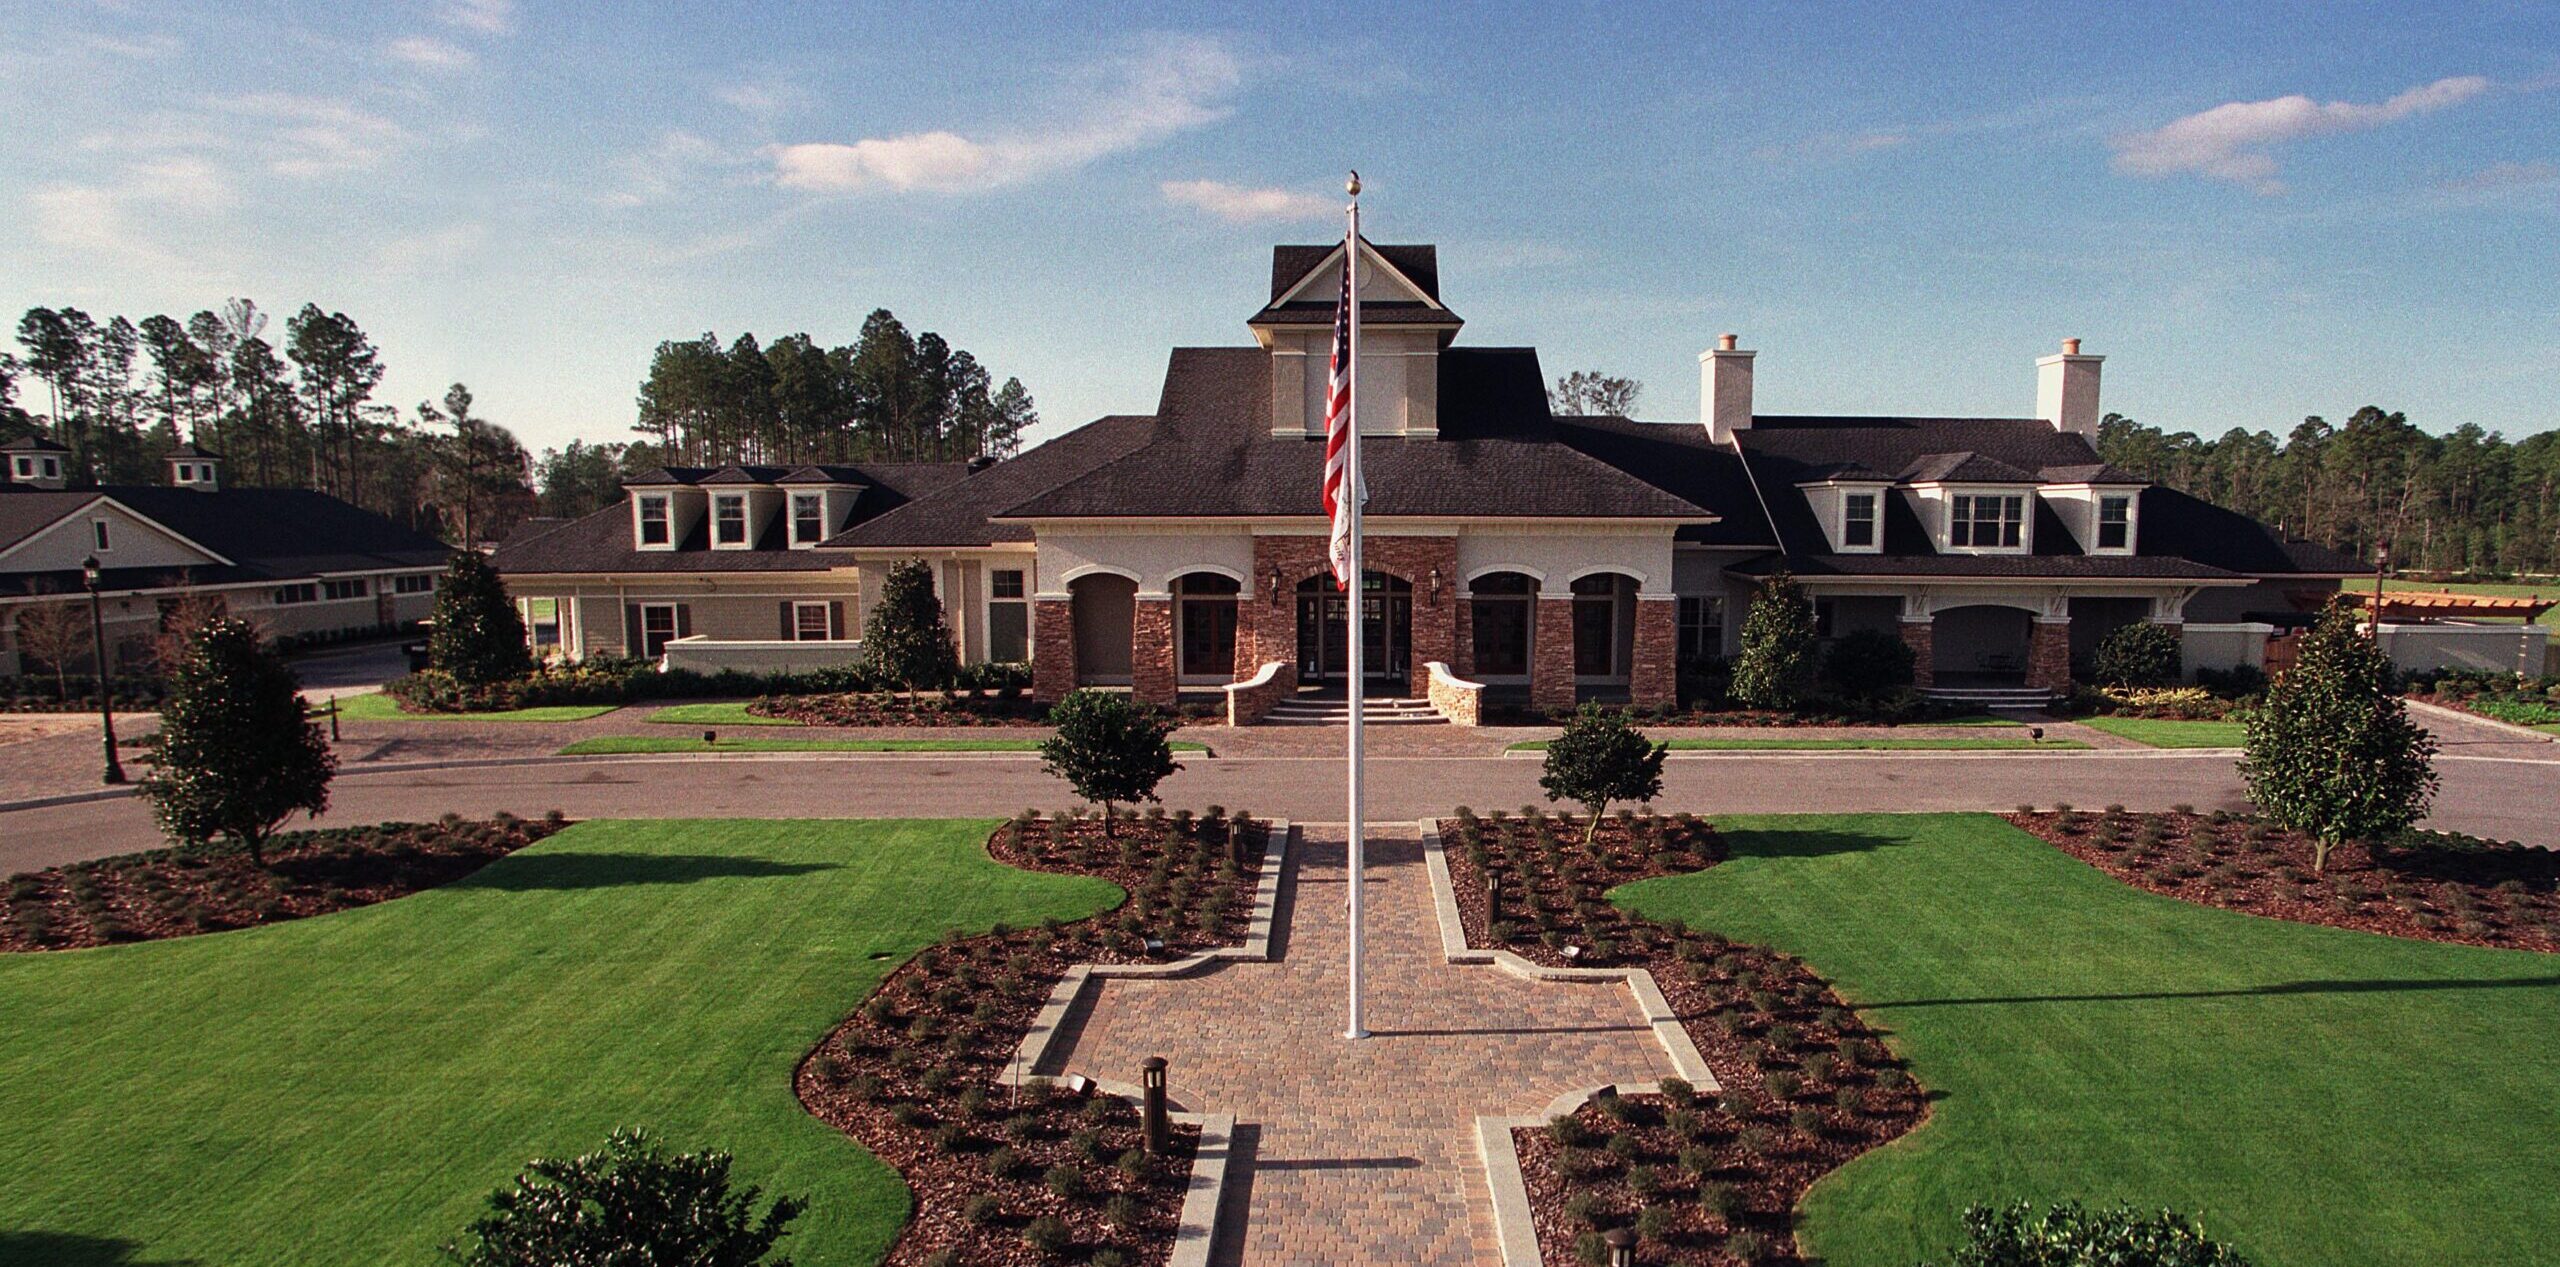 St. Johns GCC Clubhouse Exterior - WGPITTS